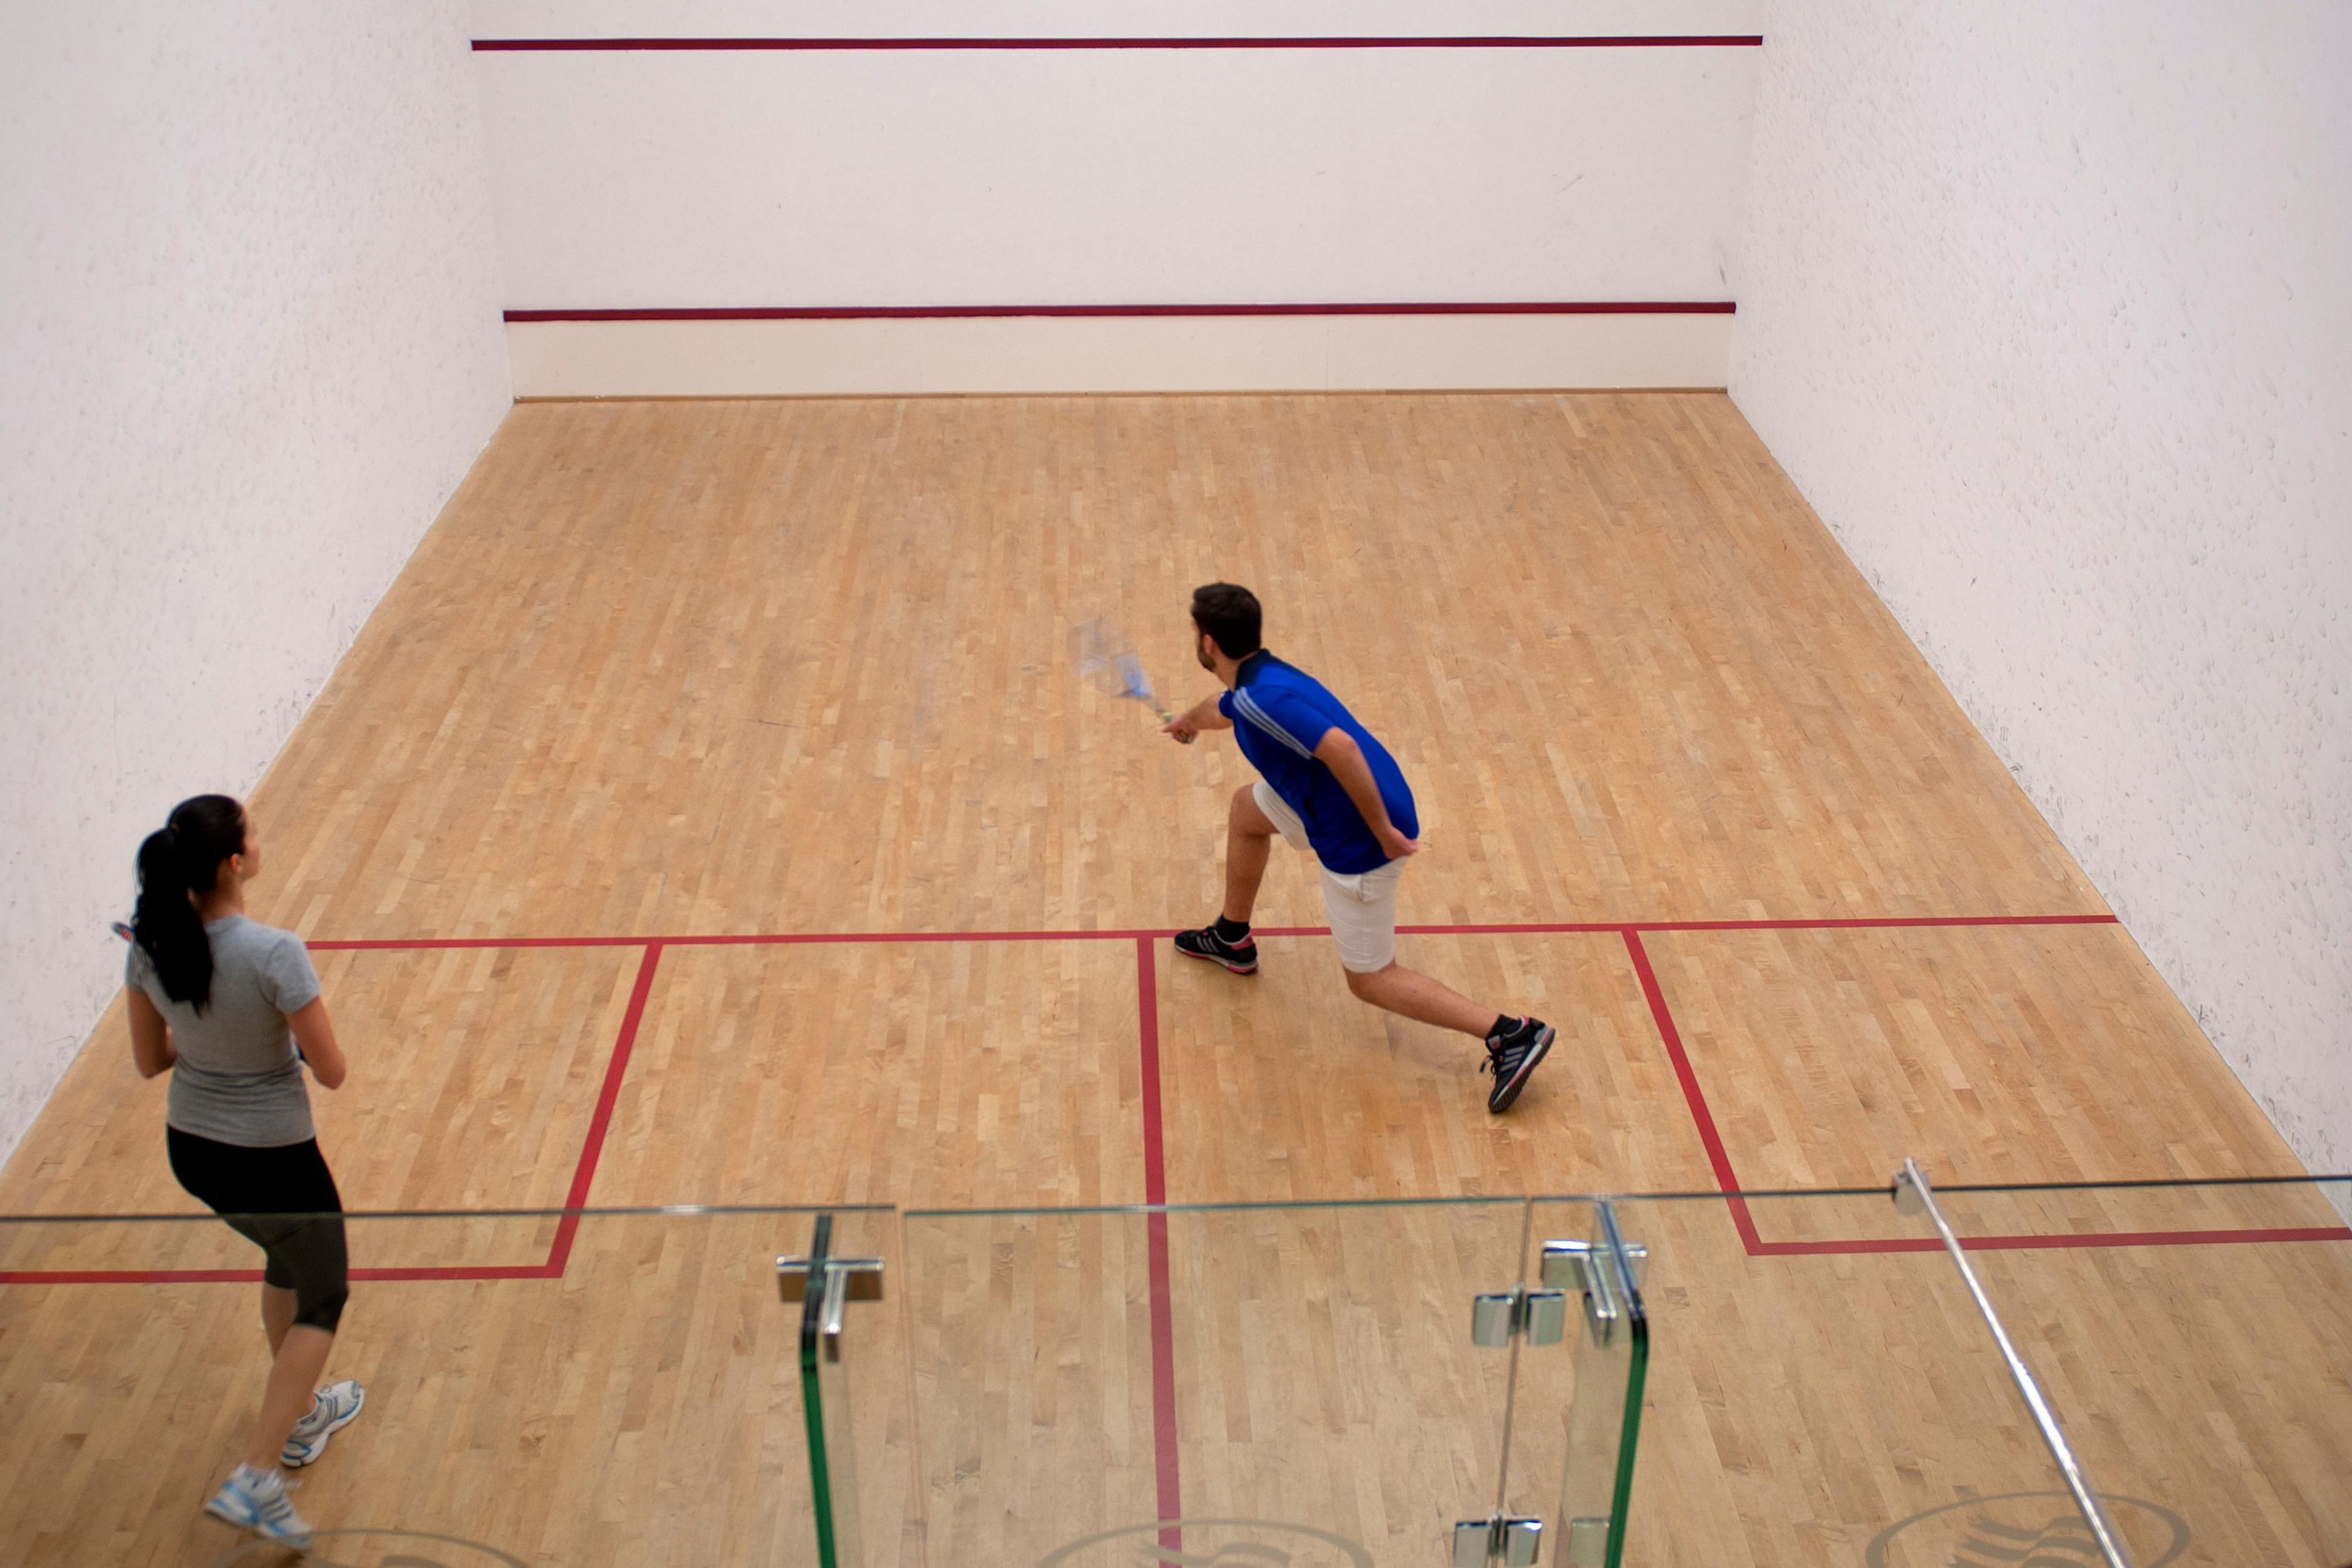 Enjoy a spirited game of squash on our inhouse squash court